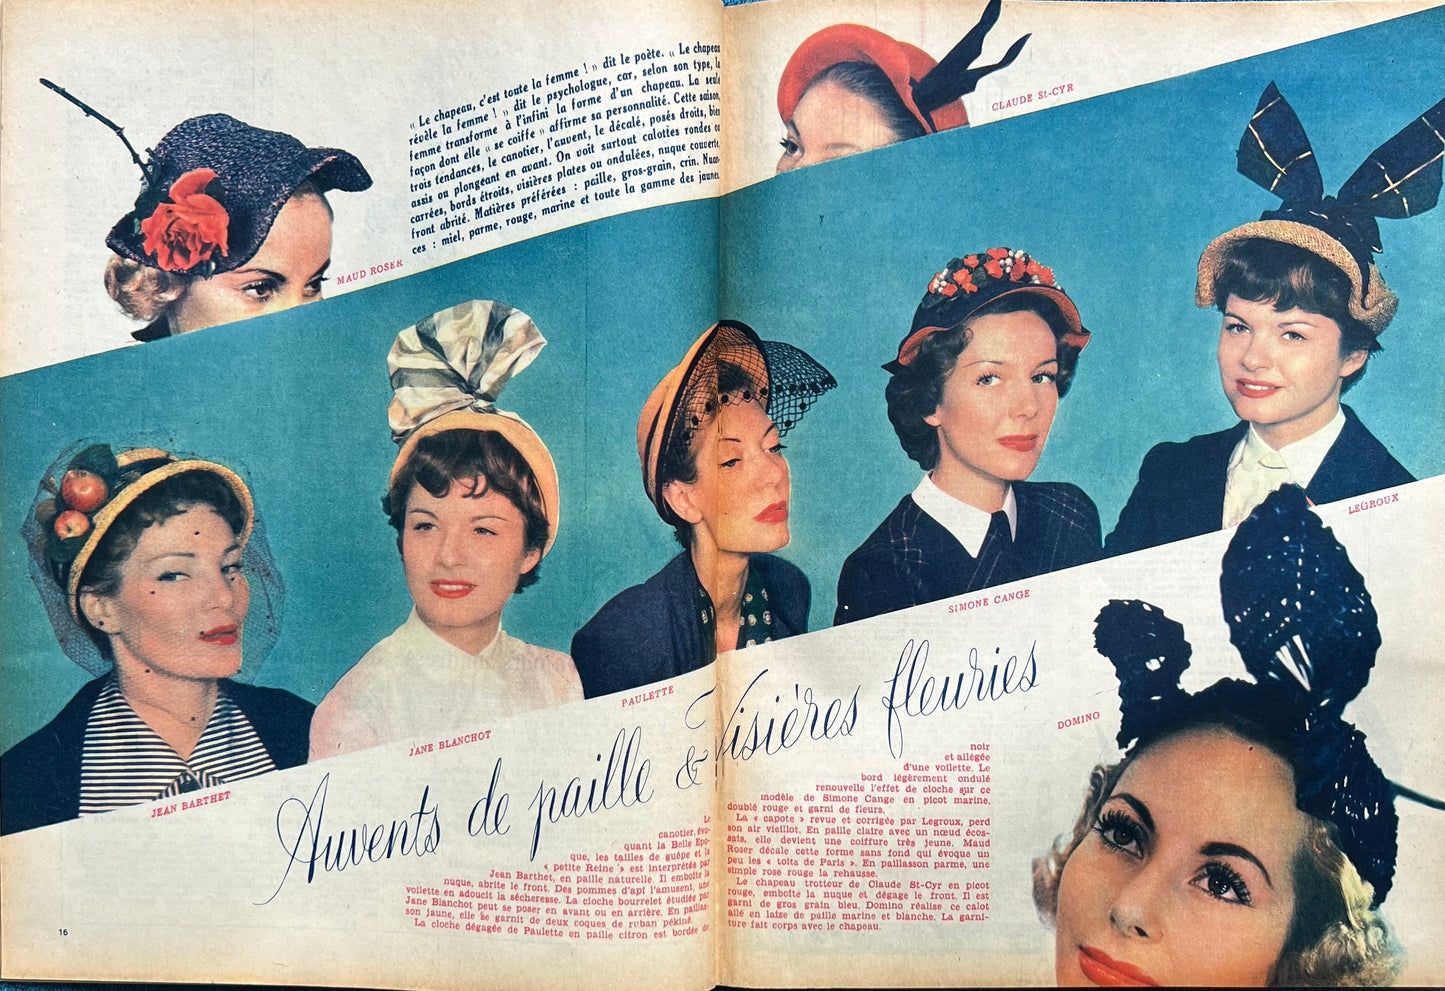 Glorious Hats in February 1950 French Women's Magazine Marie France